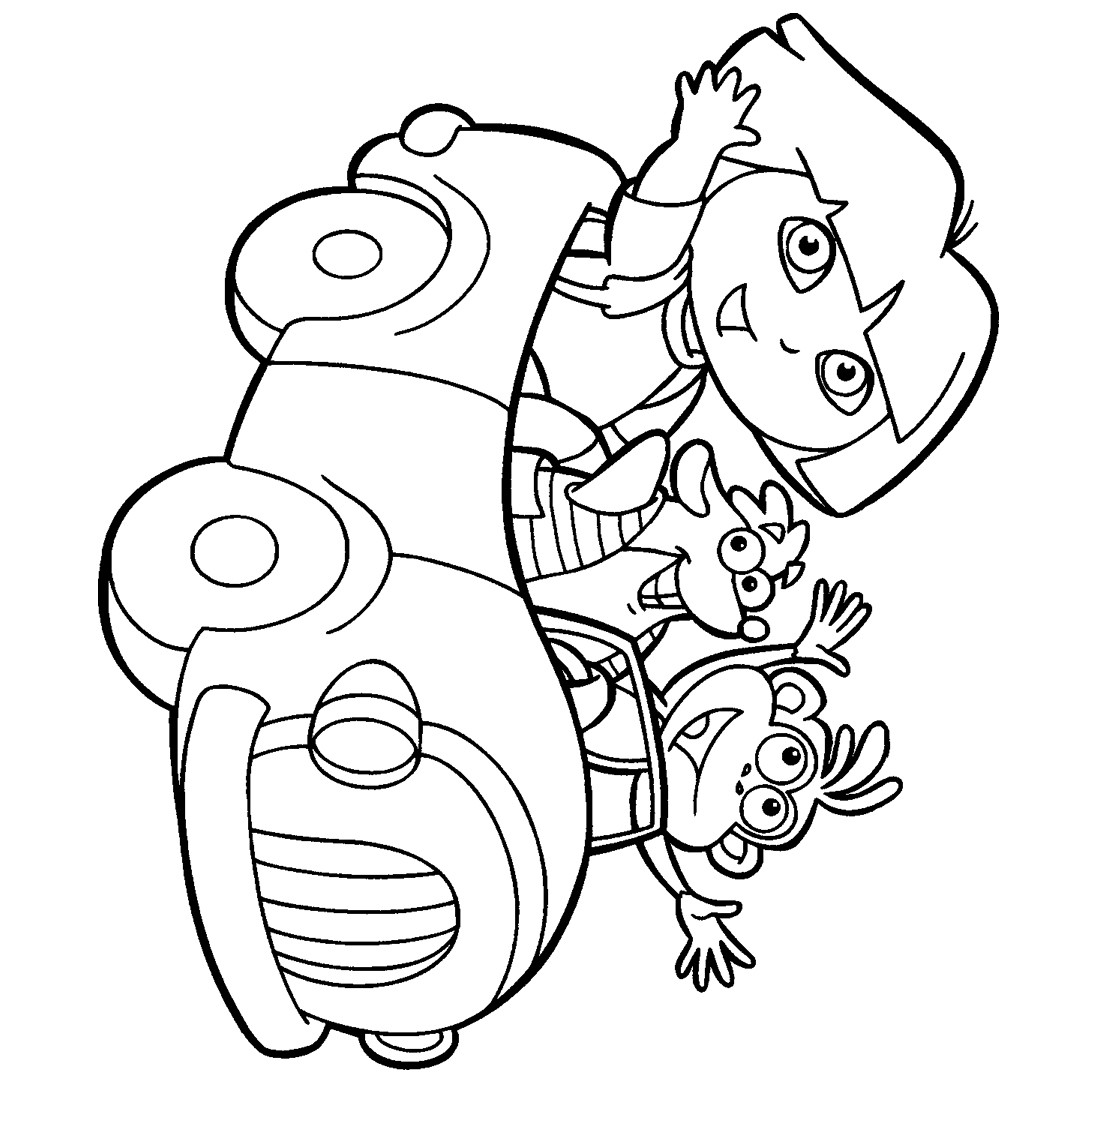 Cool Coloring Pages Printable
 Printable coloring pages for kids